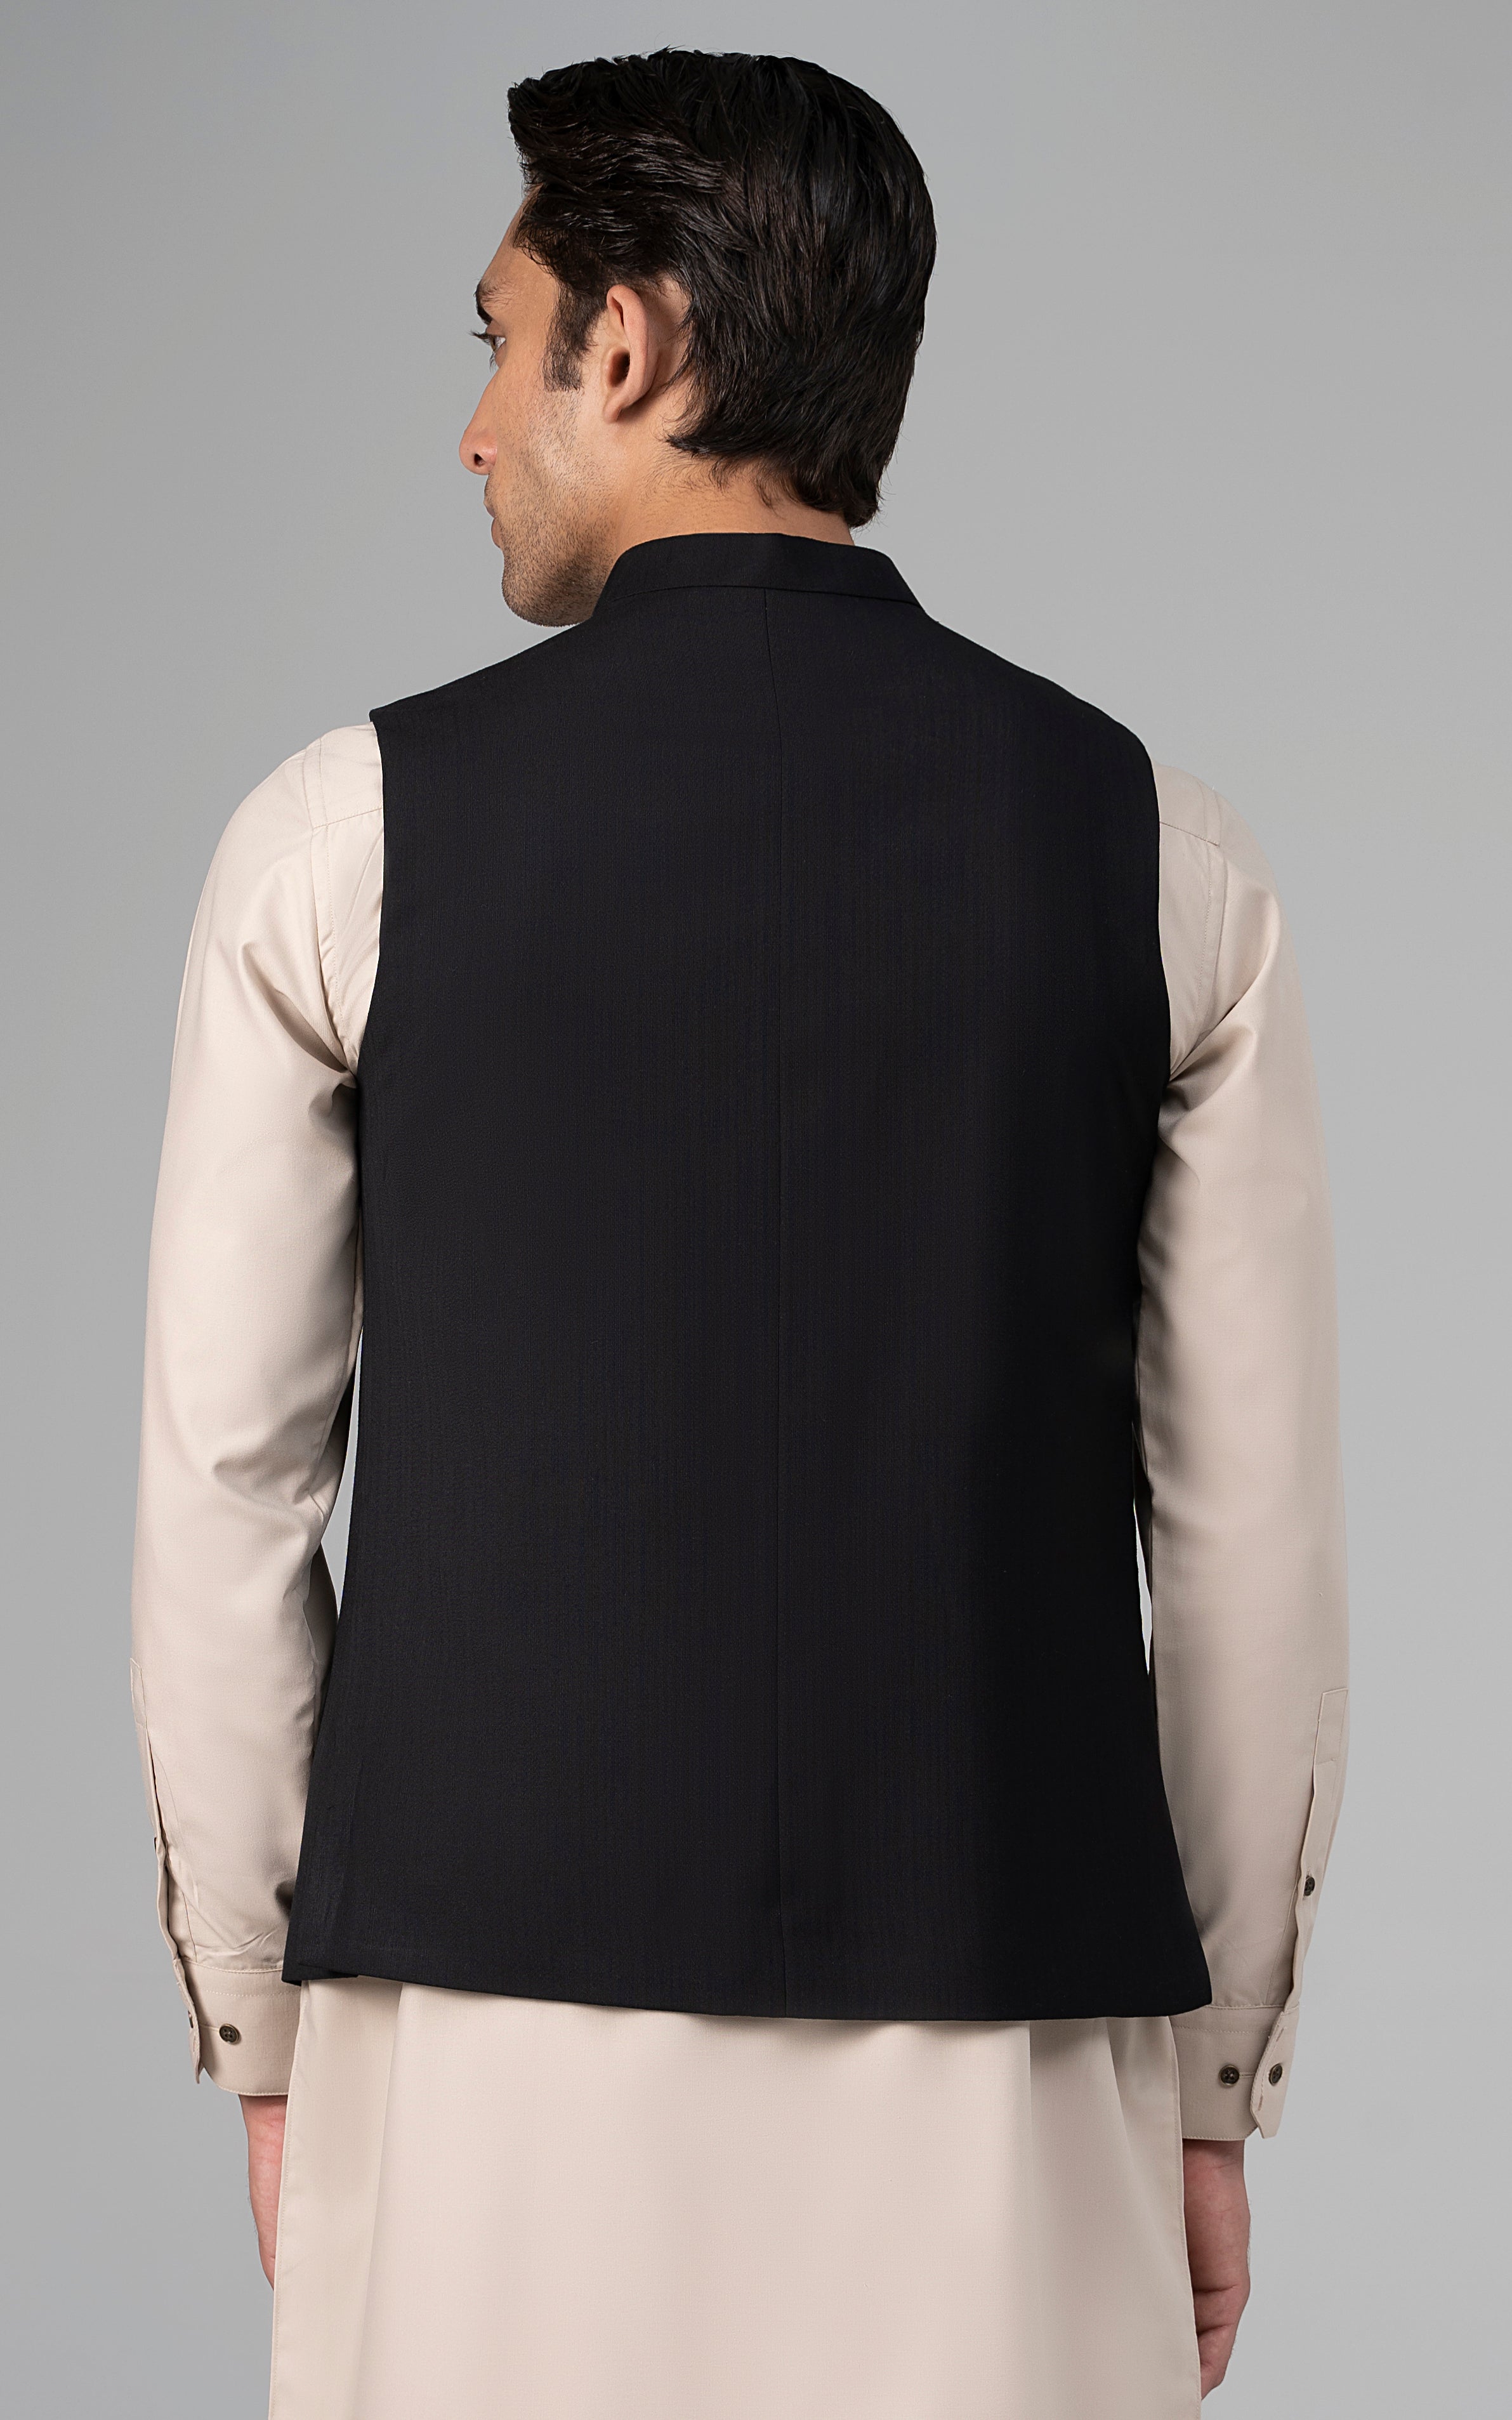 TROPICAL LOGO EMBROIDERED WAISTCOAT - SIGATURE COLLECTION BLACK